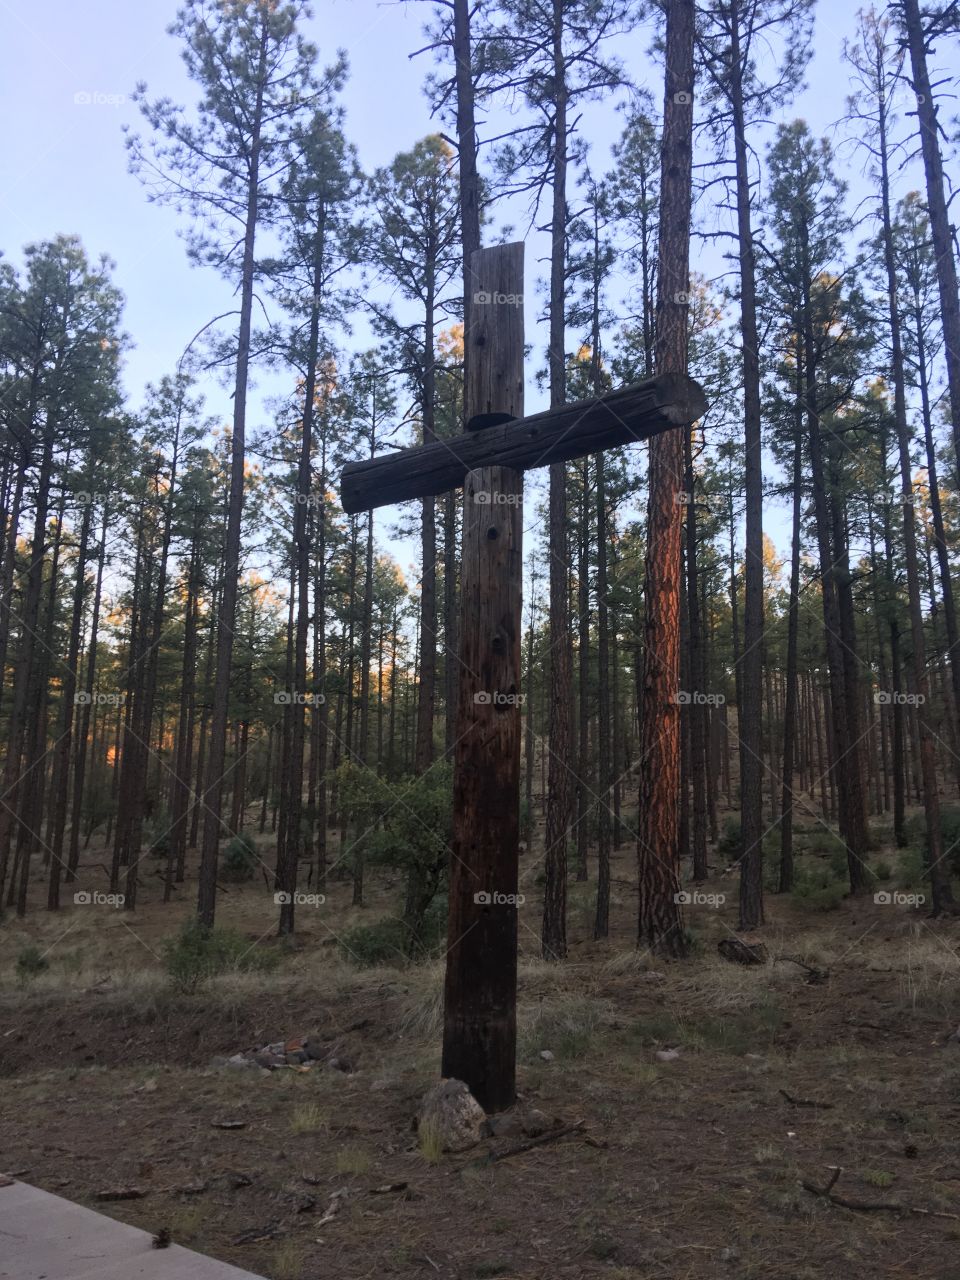 A cross made out of wood by the cabin we stayed at